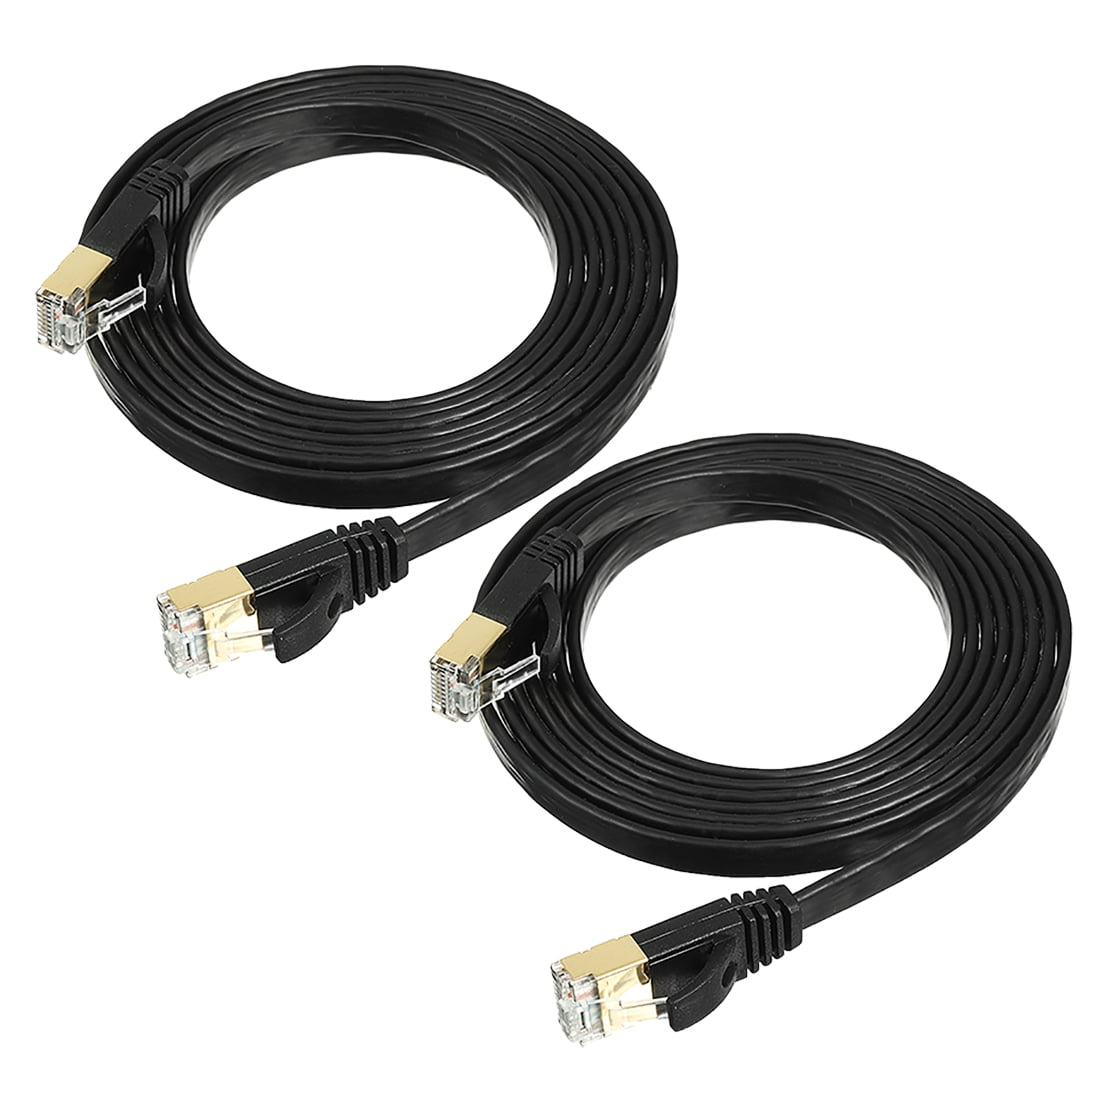 Aexit 2Pcs 3Meter Lighting fixtures and controls 10ft 8P8C CAT7 LAN Network Flat Patch Cable Black for Ethernet Router Switch